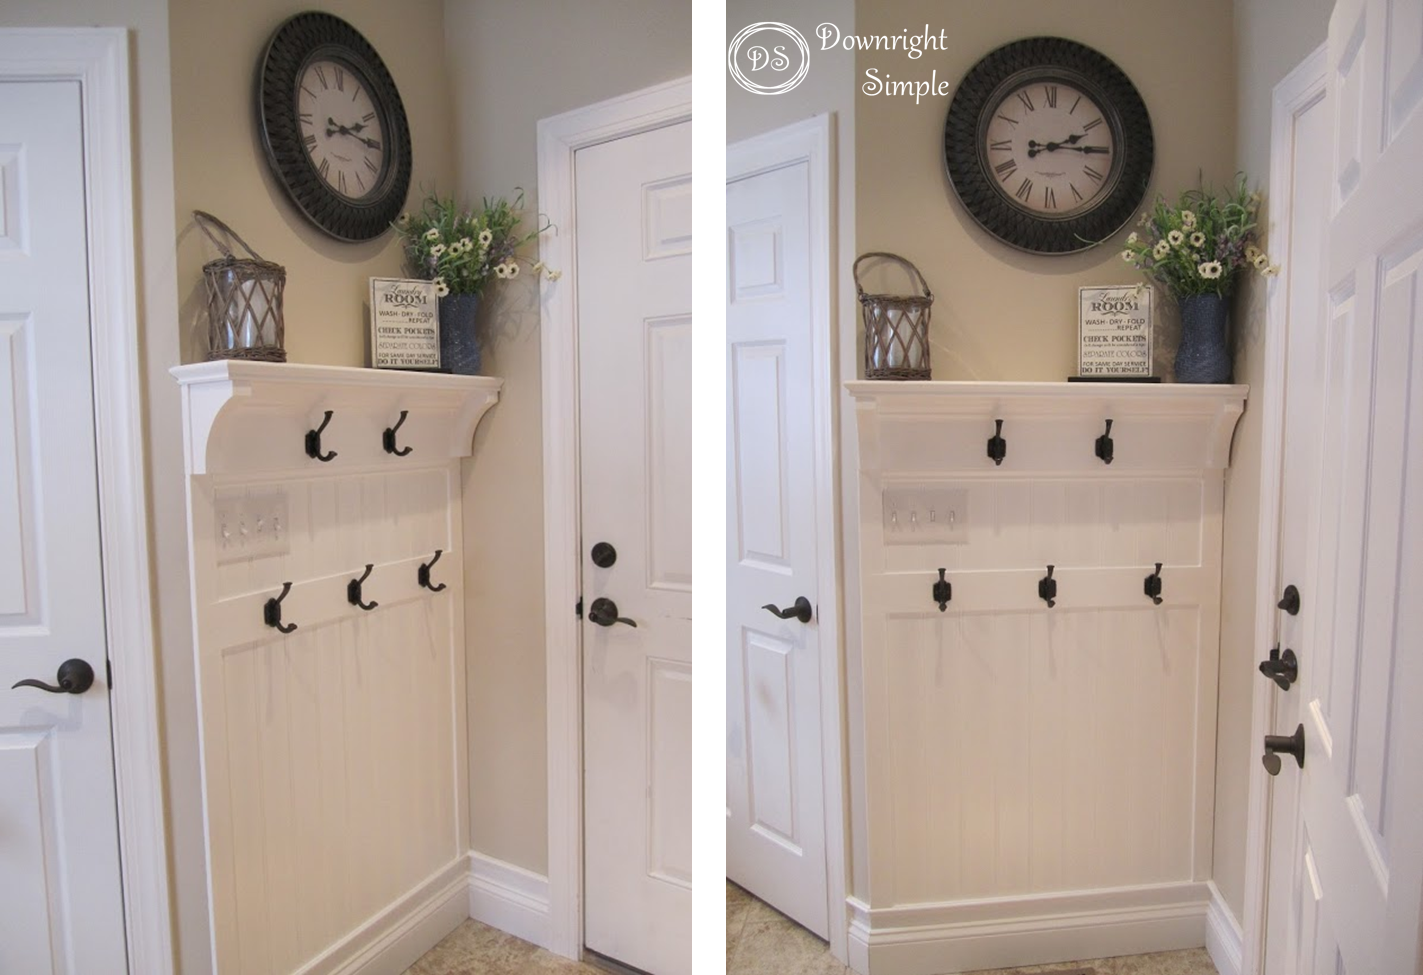 Downright Simple: Mudroom Entryway - Maximizing a Small Space